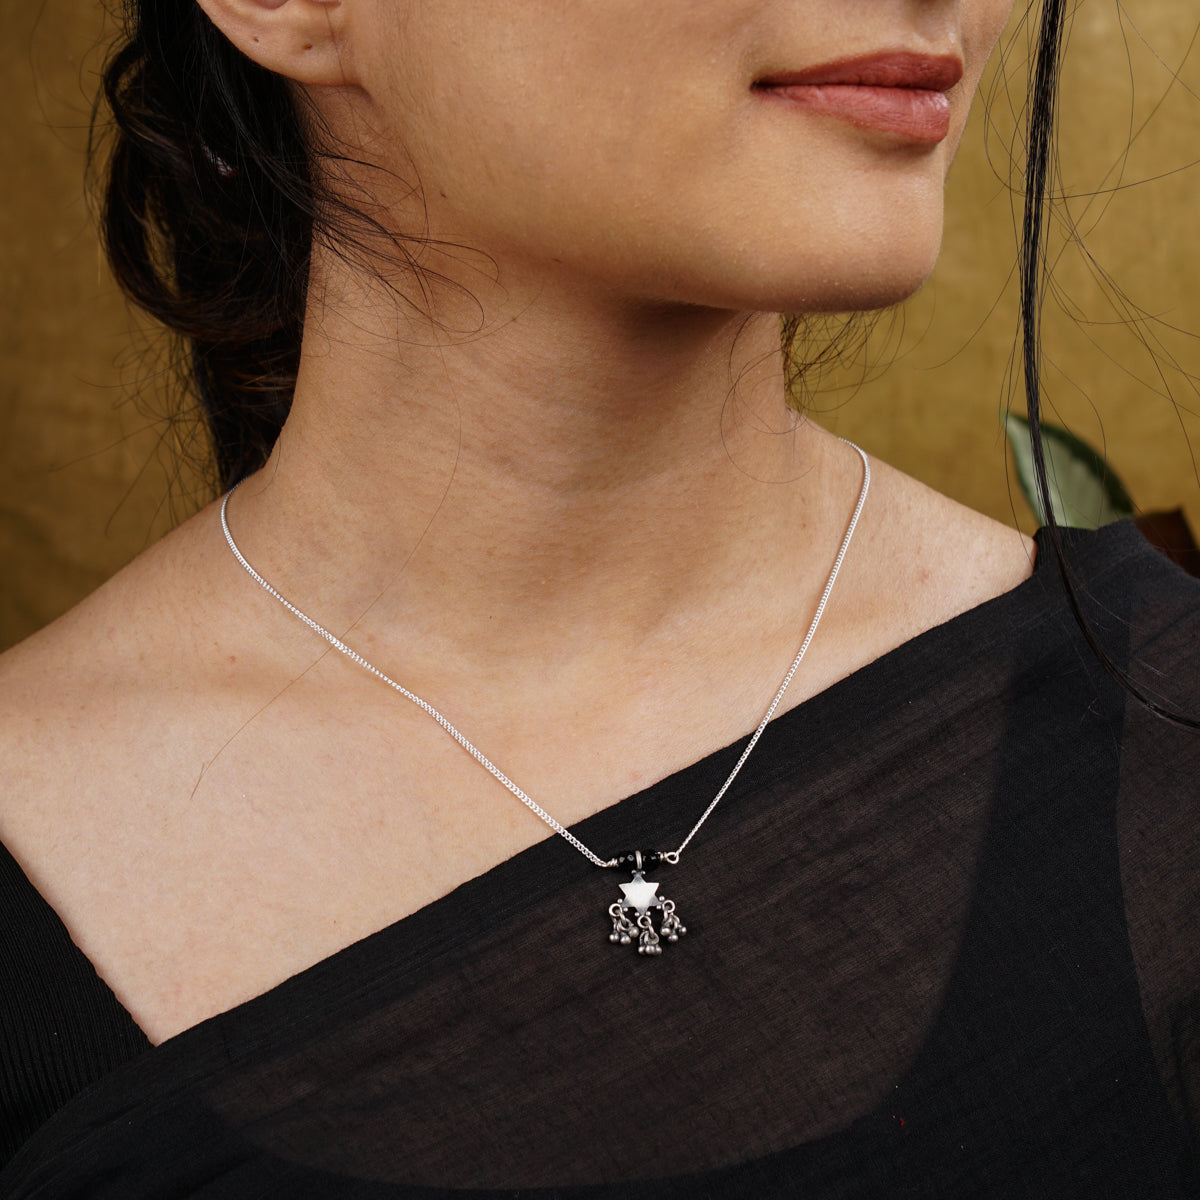 a woman wearing a necklace with a turtle on it